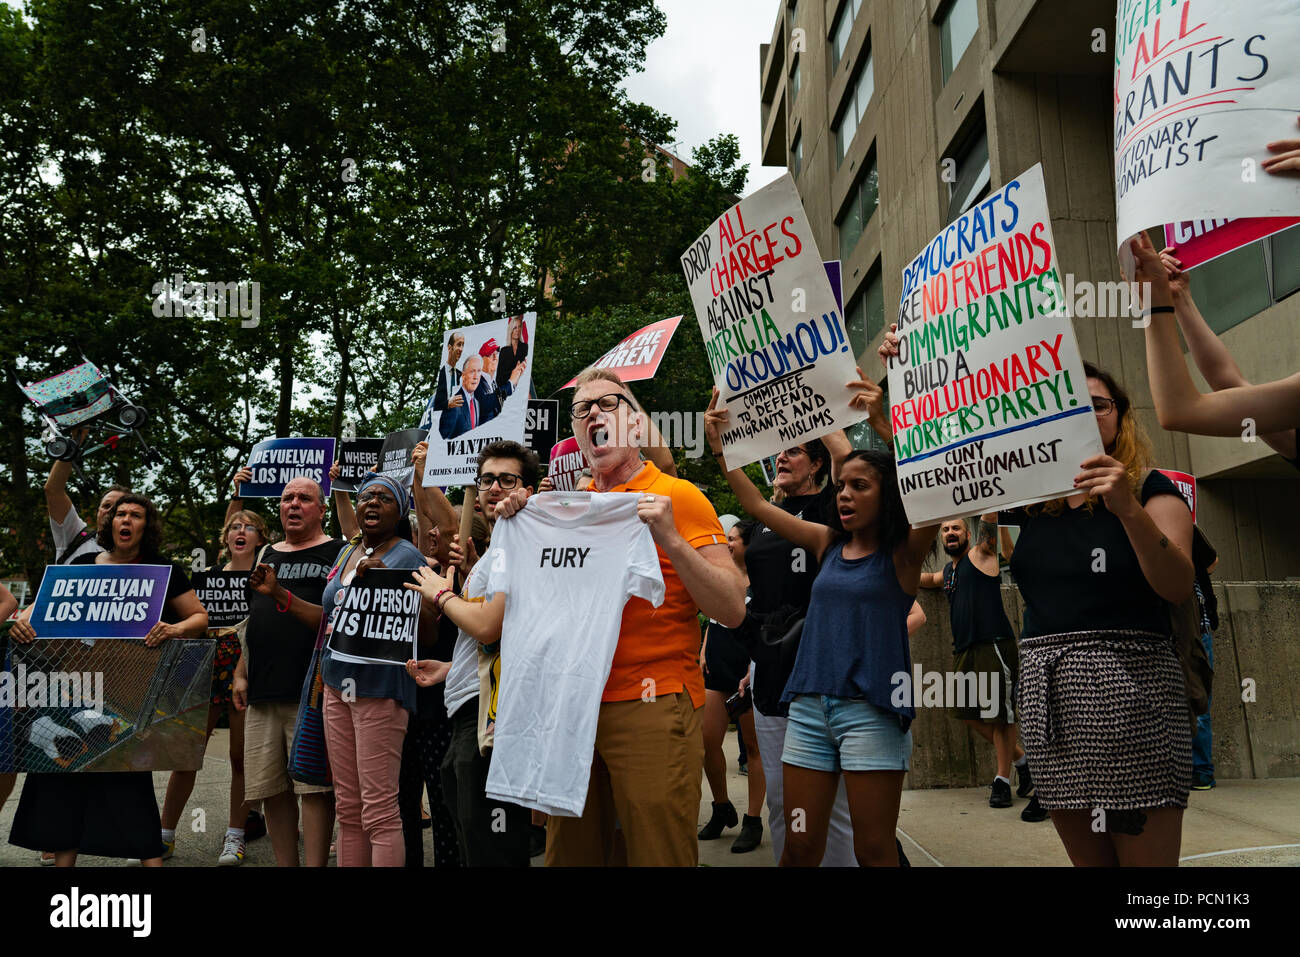 New York, New York, U.S., 3 August 2018 Supporters of immigration activist Therese Patricia Okoumou rally after she appeared in federal court in Manhattan for a hearing on trespassing and disorderly conduct charges.  Okoumou scaled the base of the Statue of Liberty on July 4, 2018, to protest against Trump administration immigration policies.  Okoumou wore a green dress to court bearing the words “I really care why won’t u?” – a response to first lady Melania Trump, who wore a jacket with the words “I really don’t care, do u?” when she visited a facility for migrant children in June. Stock Photo